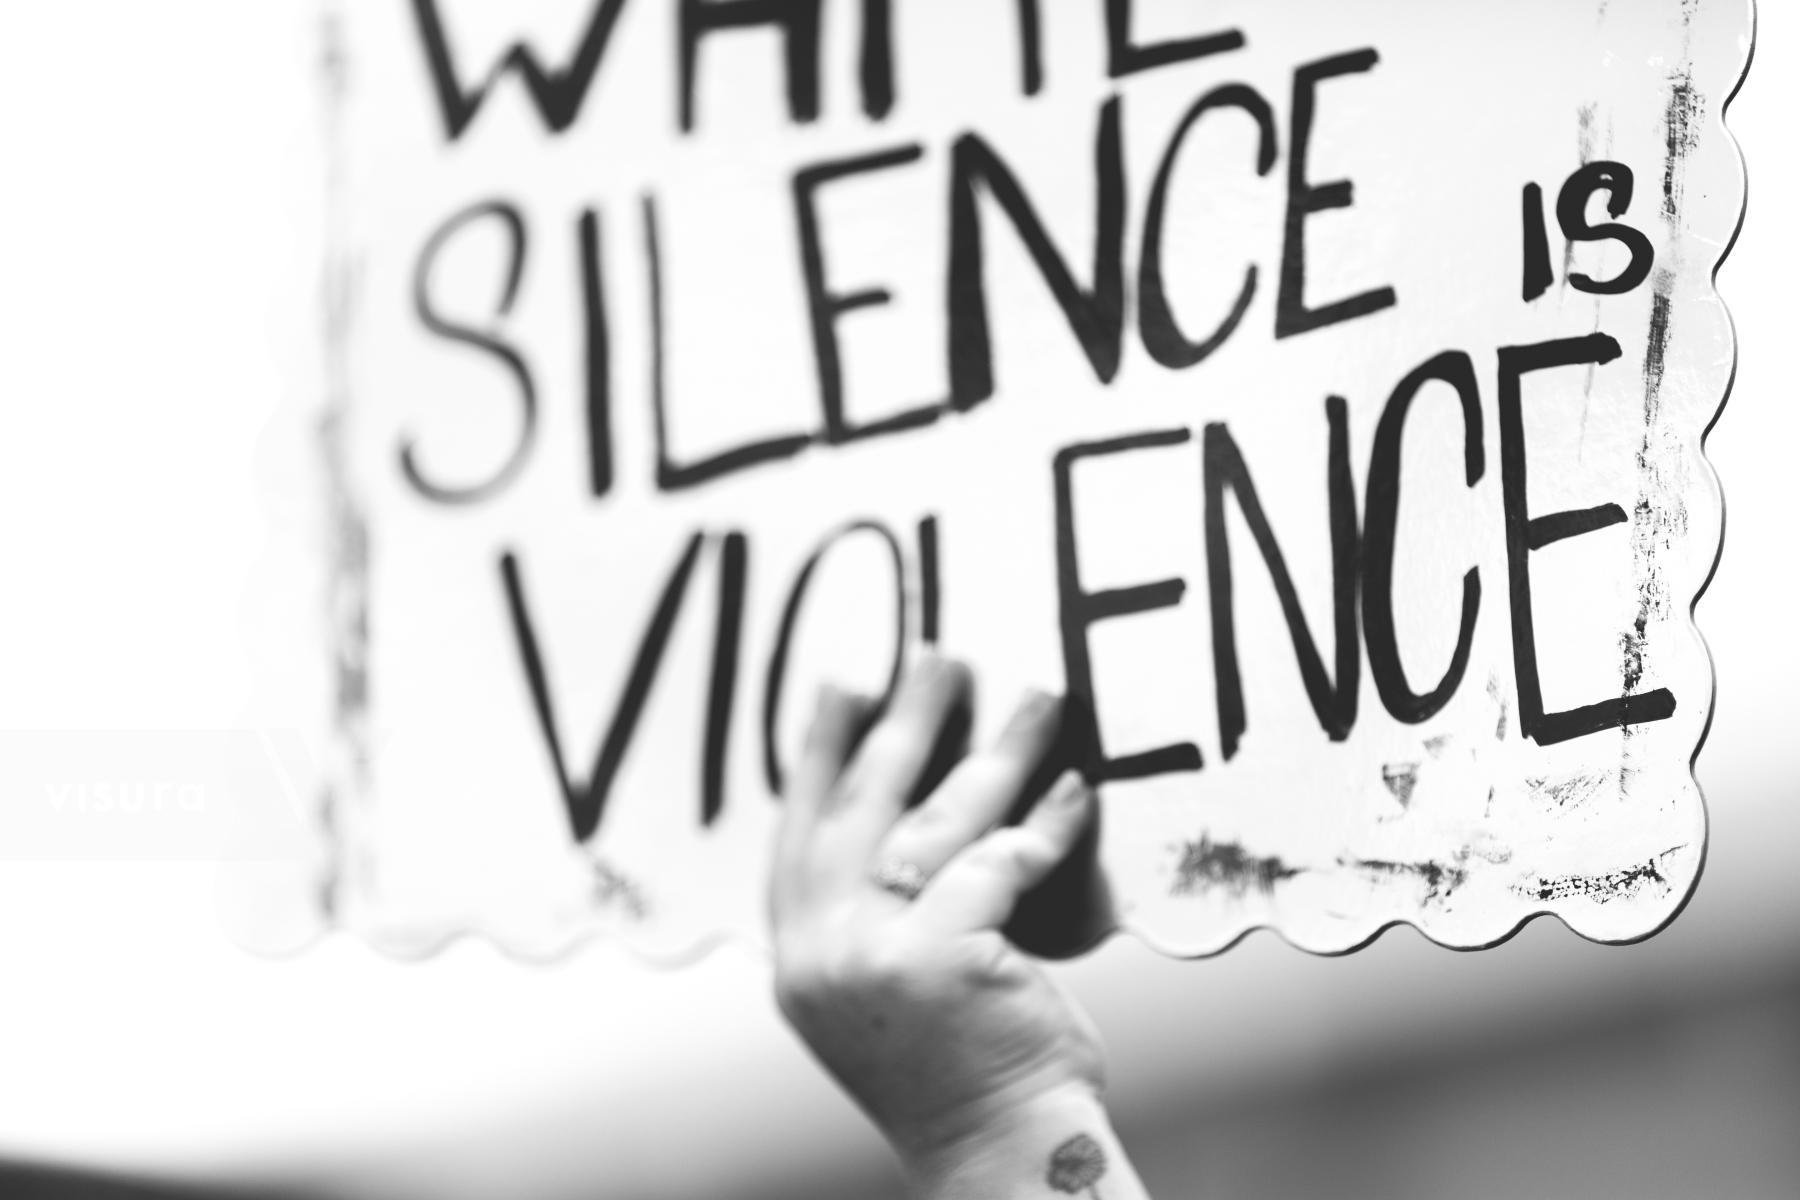 Purchase White Silence is Violence by J. Genevieve